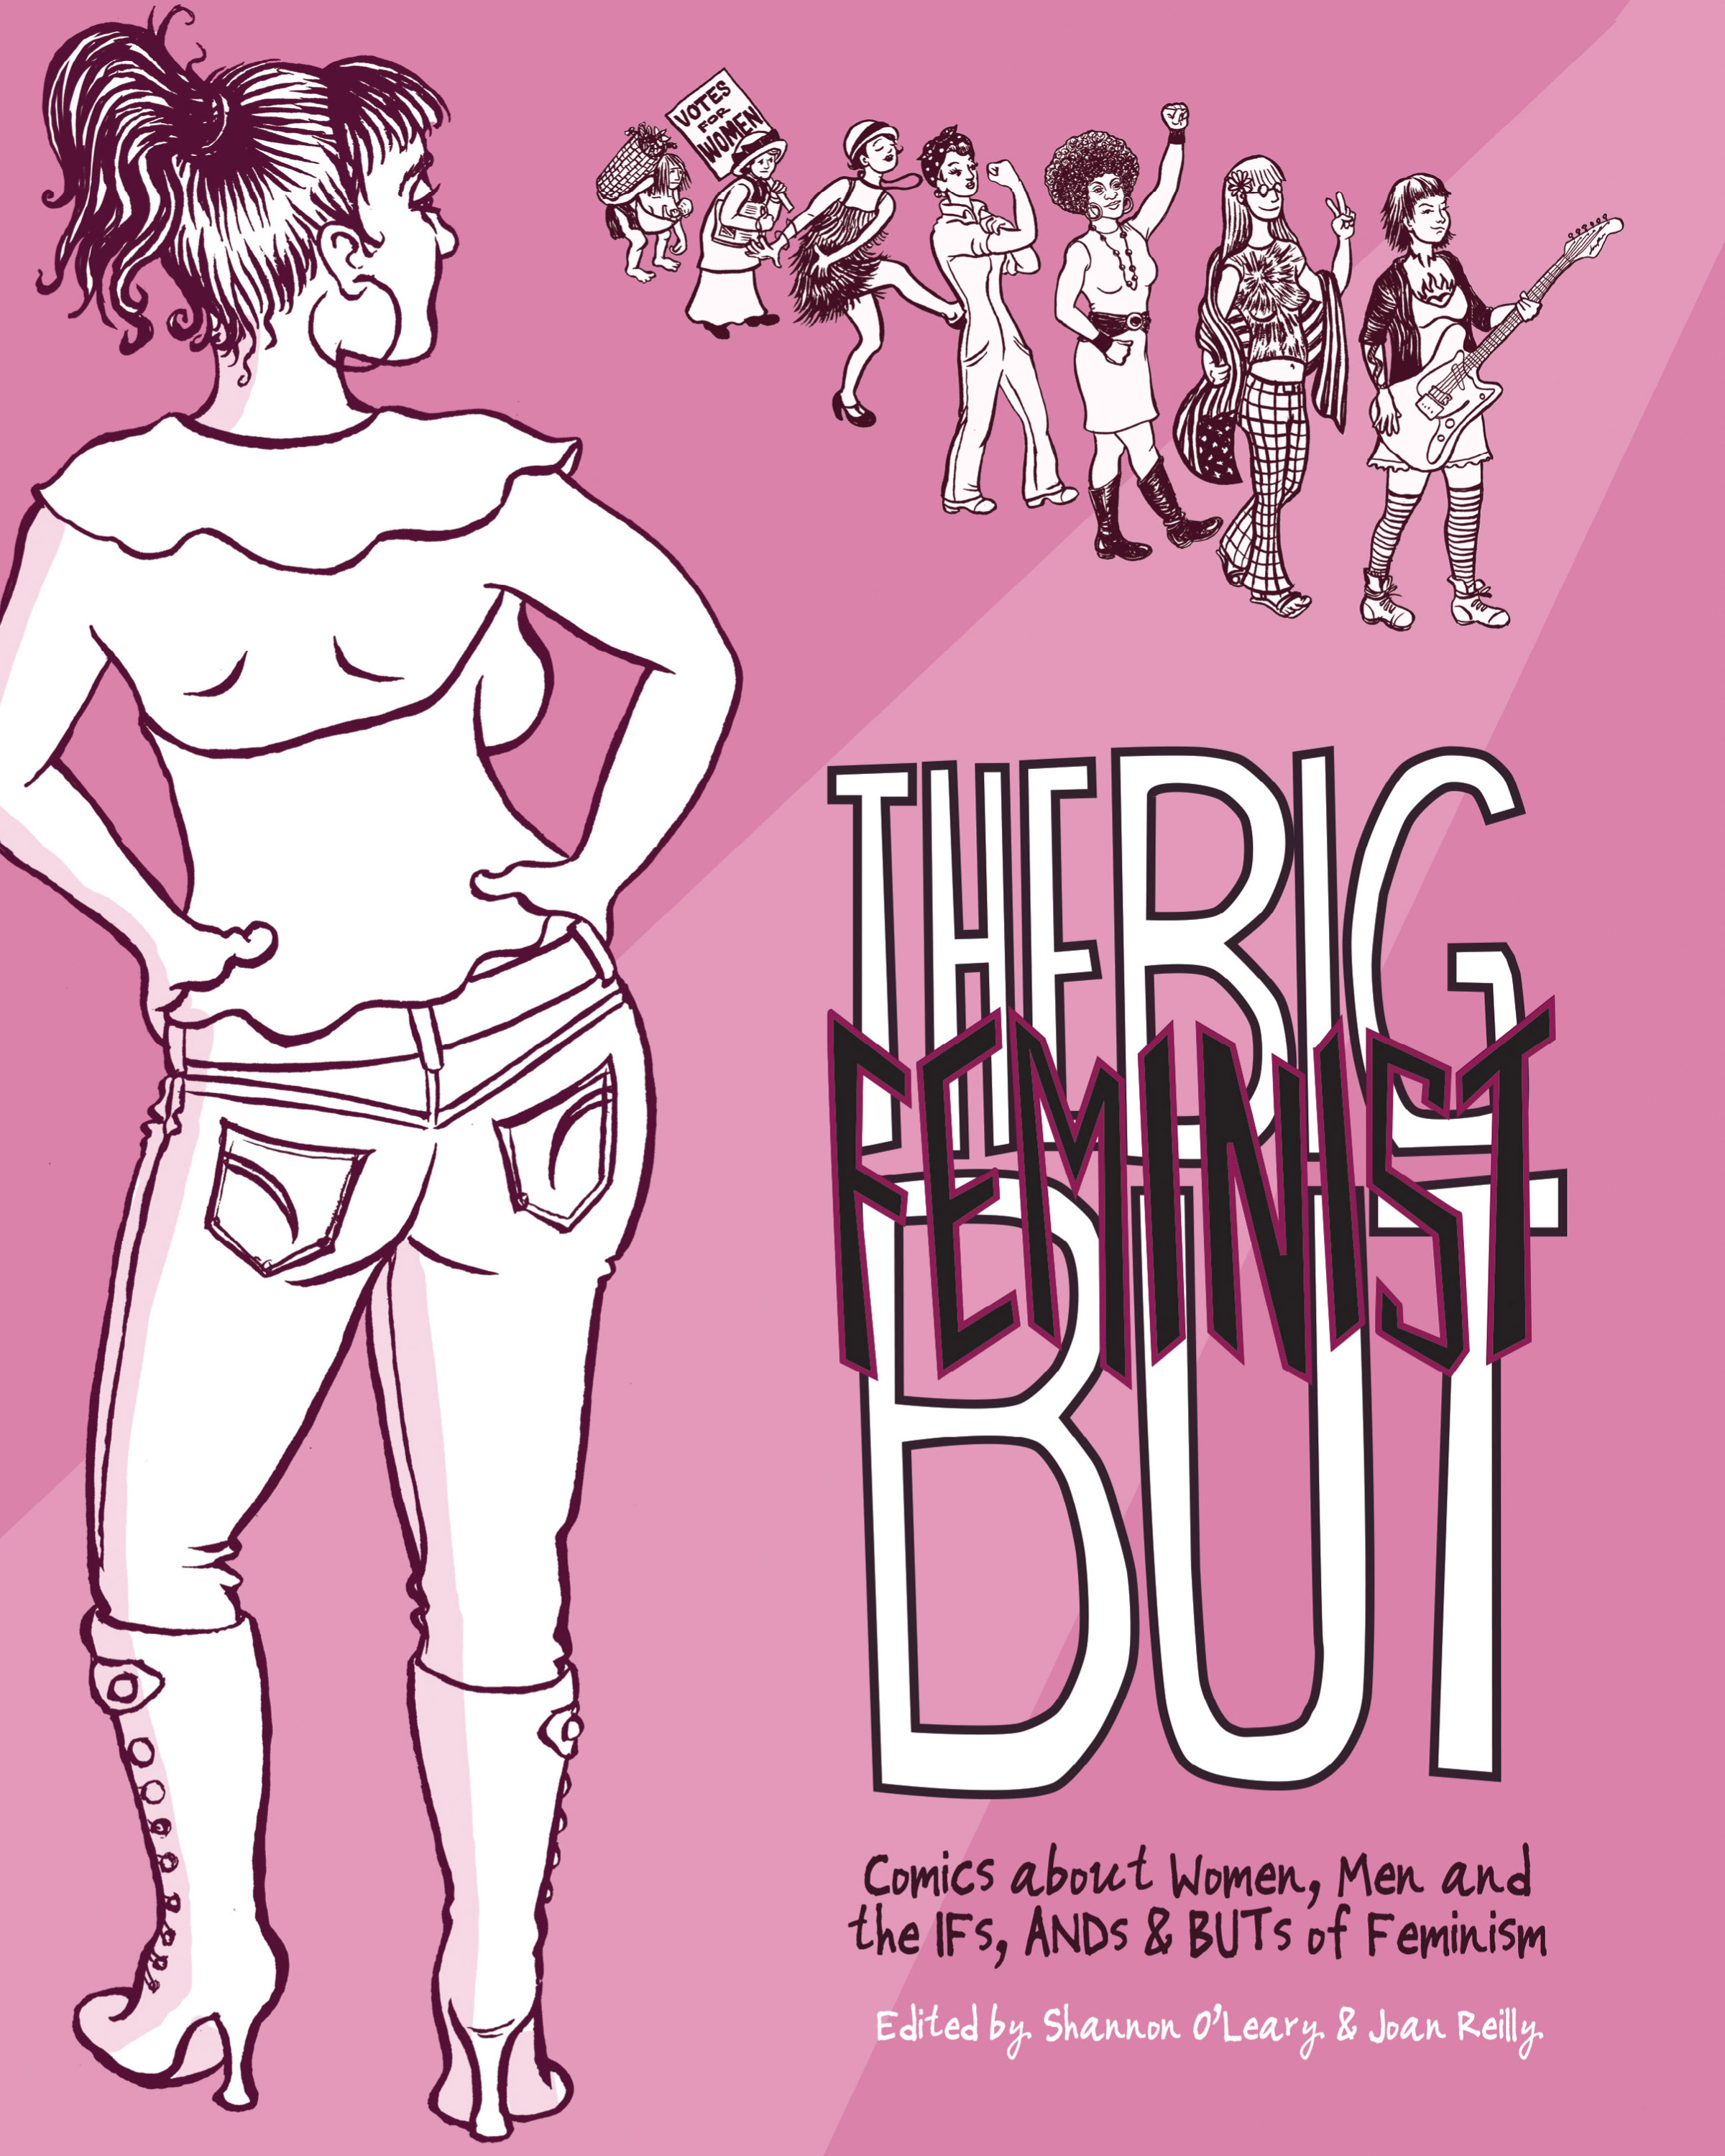 Read online The Big Feminist BUT: Comics About Women comic -  Issue # TPB (Part 1) - 1